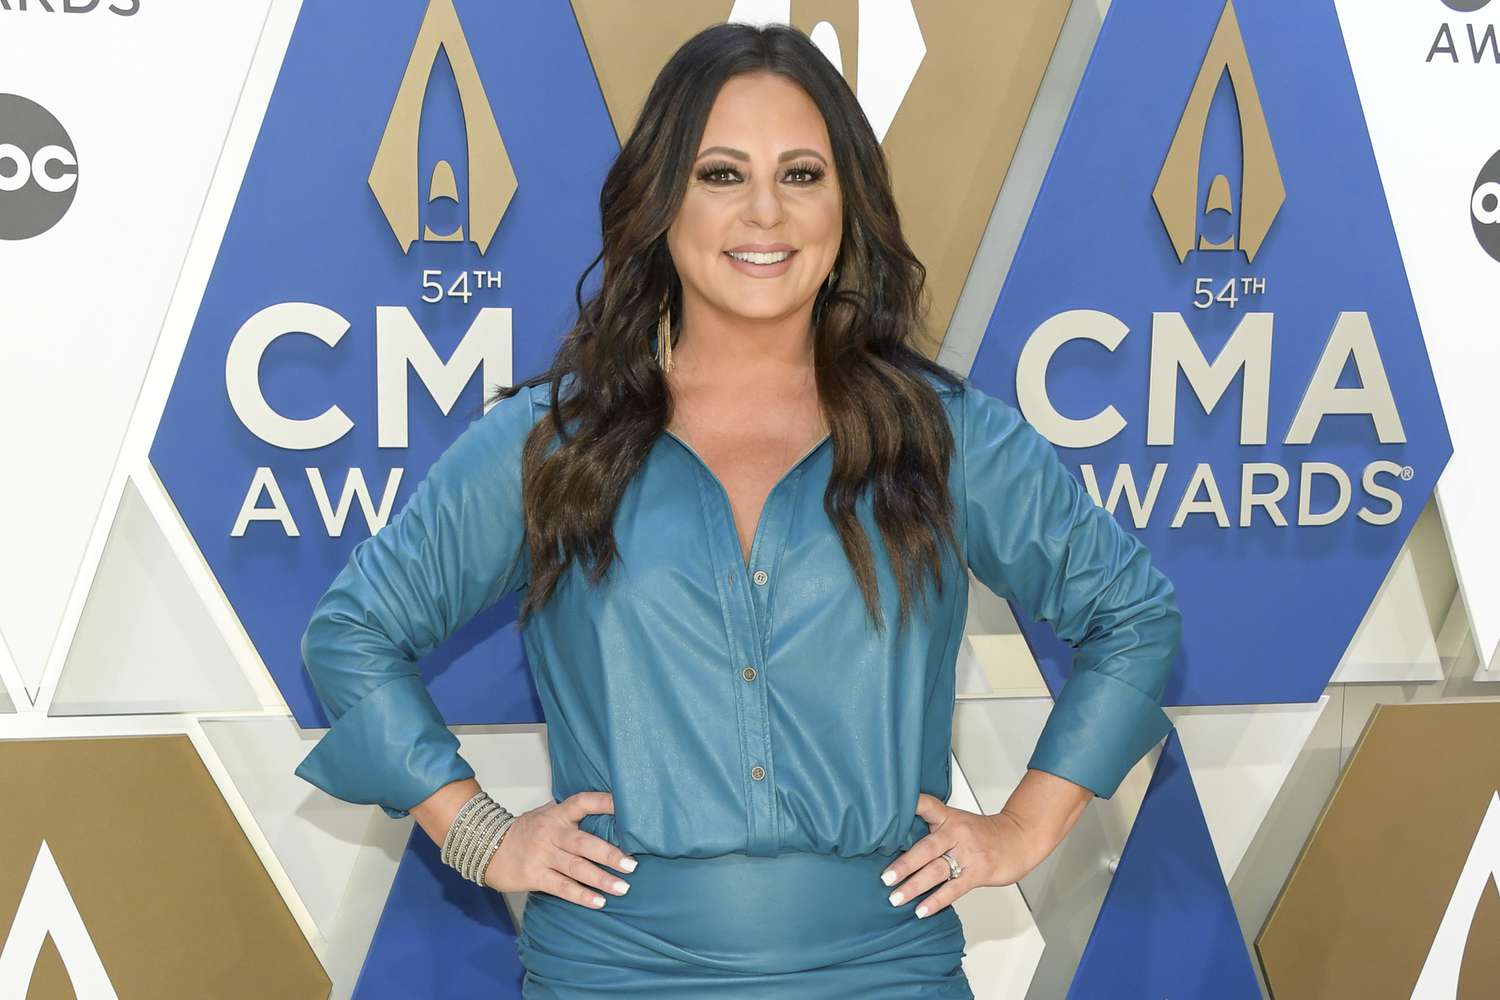 Sara Evans attends the 54th annual CMA Awards at the Music City Center on November 11, 2020 in Nashville, Tennessee.